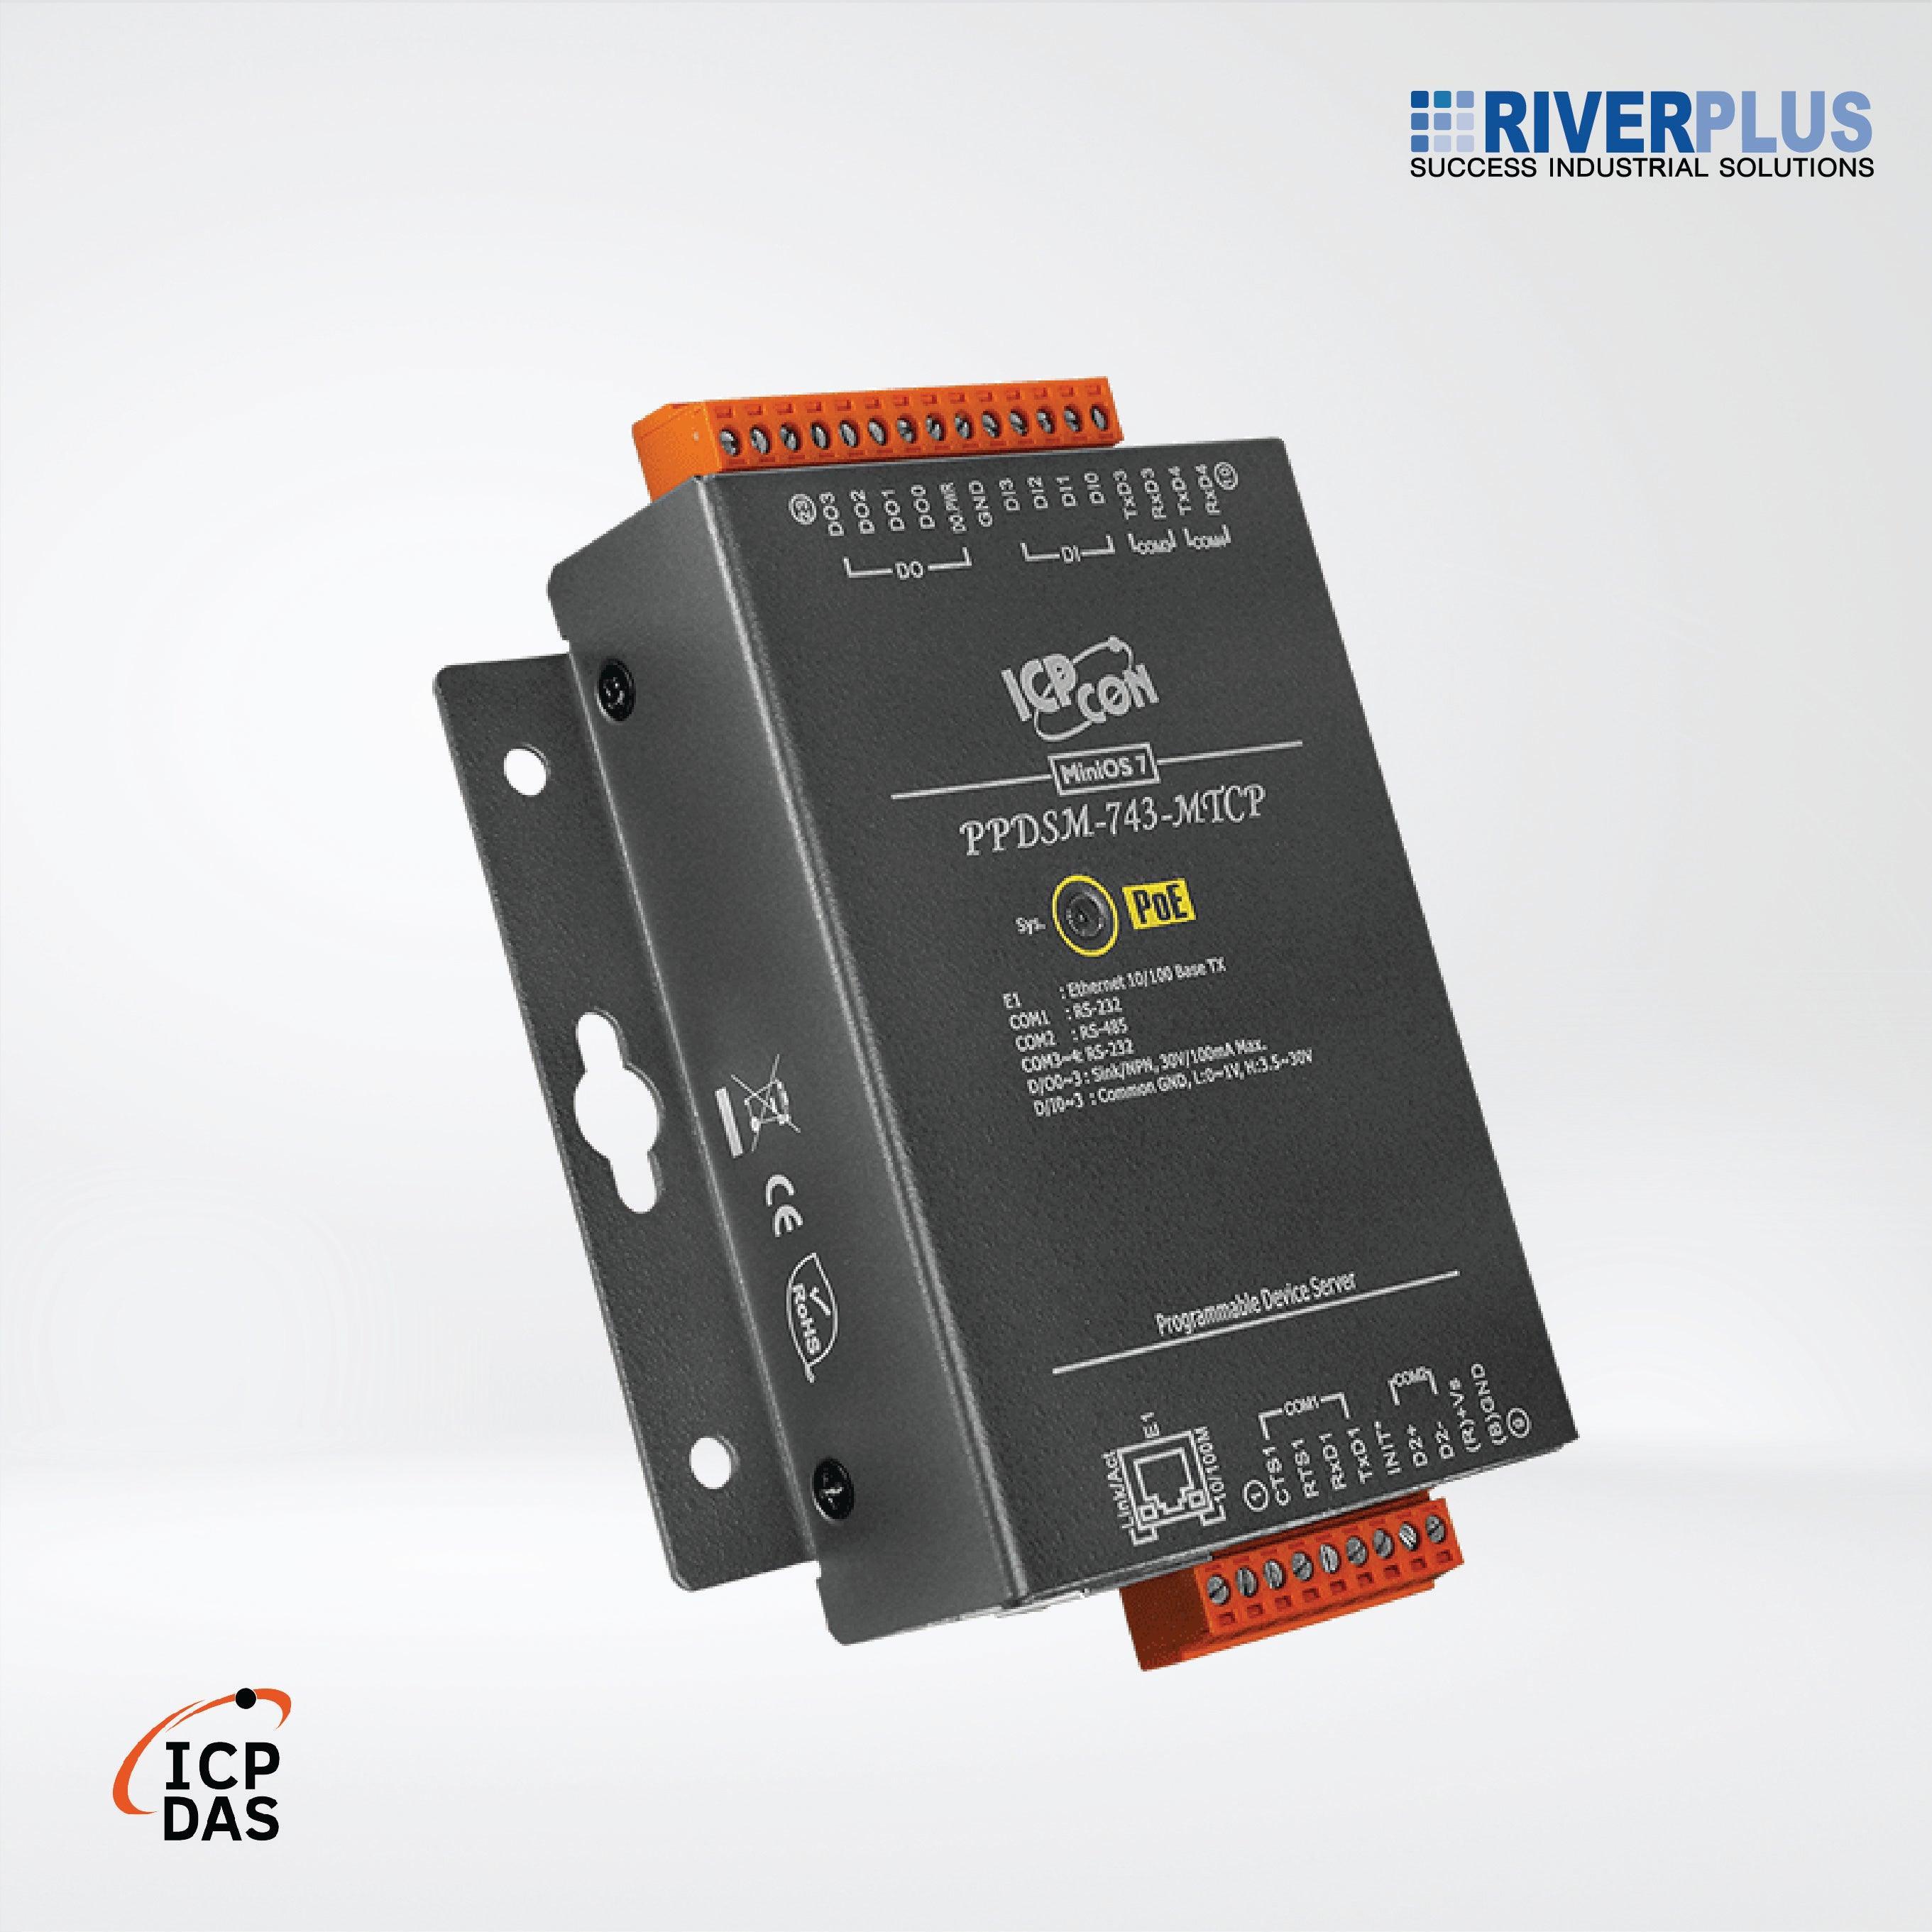 PPDSM-743-MTCP Programmable (3x RS-232 and 1x RS-485) Serial-to-Ethernet Device Server - Riverplus